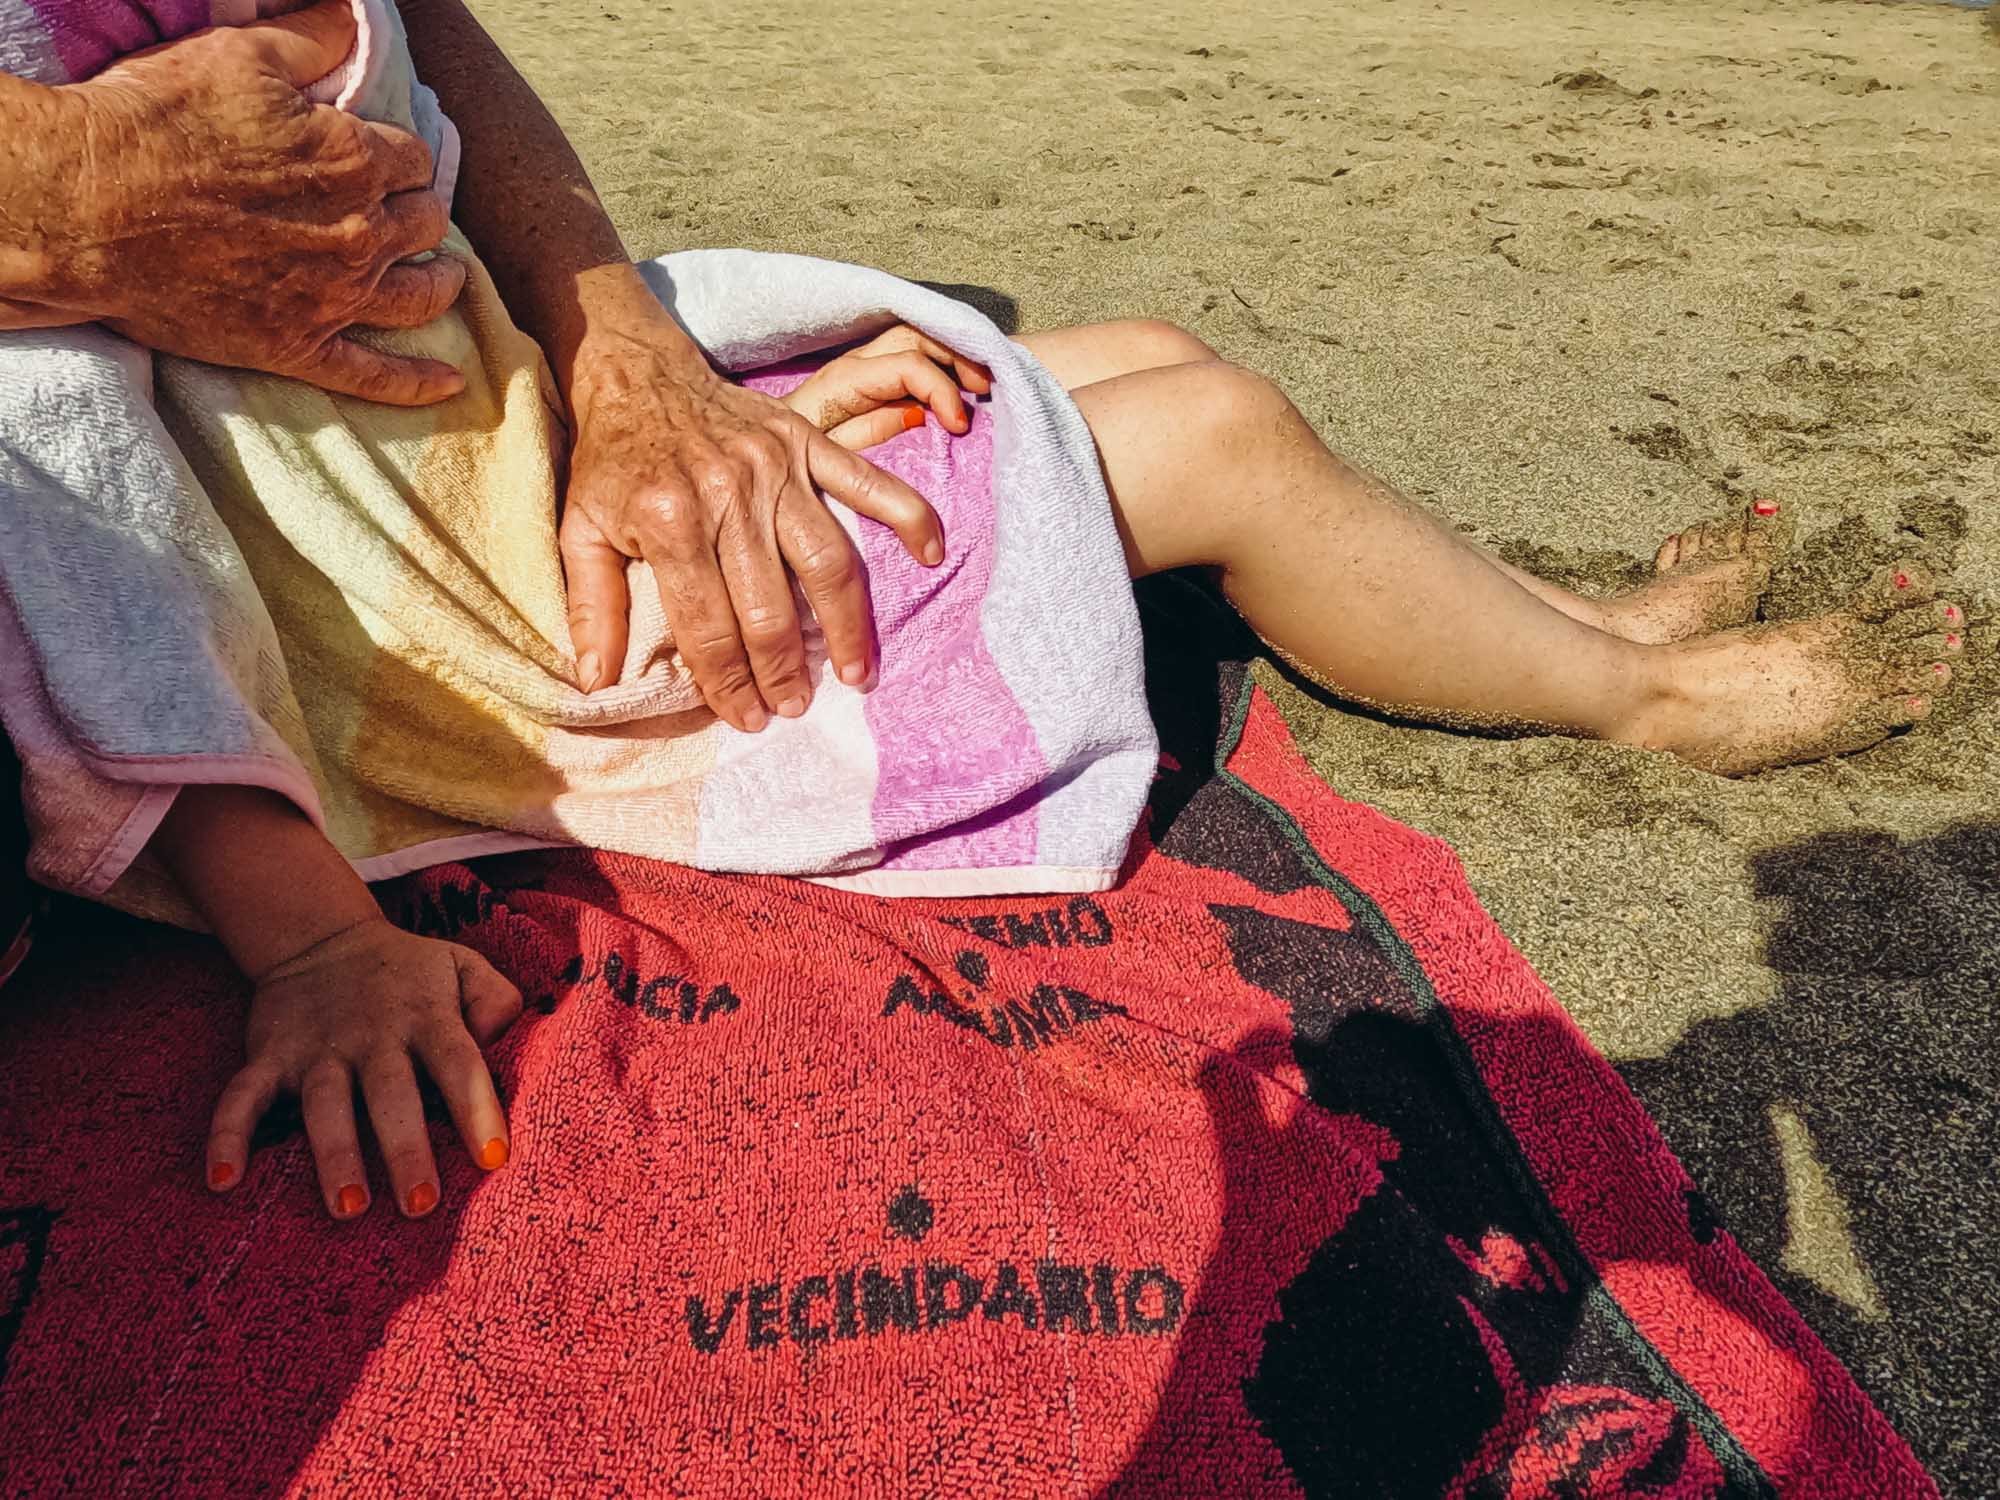 child-grandmother-sitting-beach-towel-holding-unposed-family-photography-real-family-life-sussex.jpg